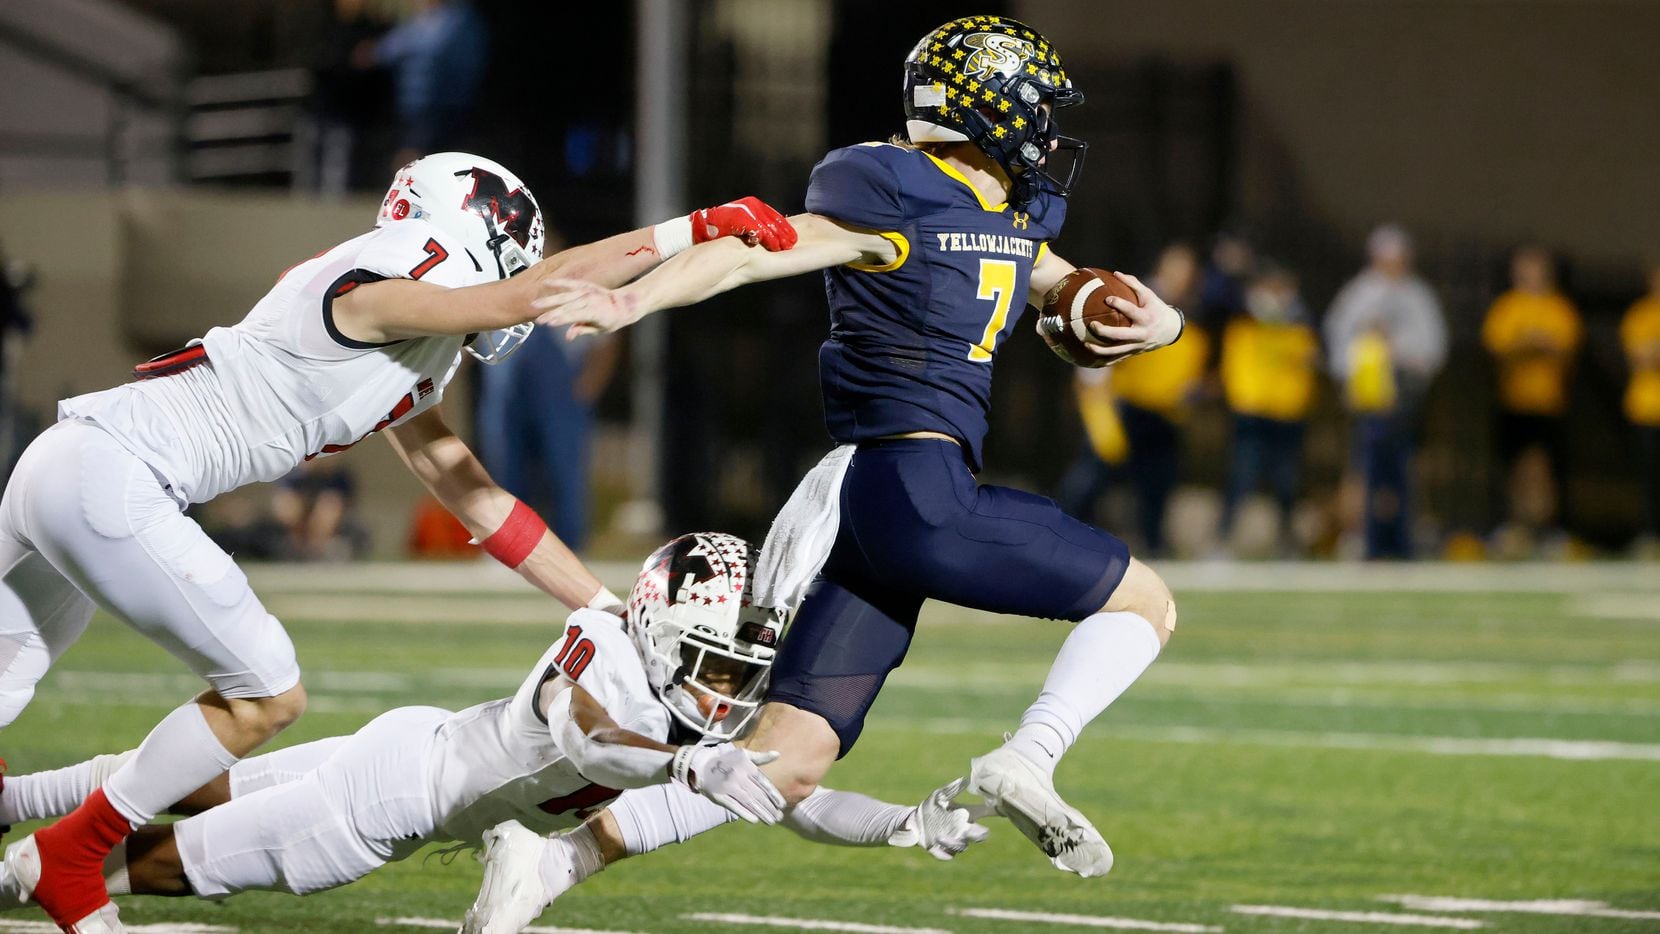 Melissa’s Gunnar Wilson (7) and Parrish Adger (10) tackle Stephenville quarterback Ryder Lambert (7) during the first half of a Class 4A Division I Region II final high school football game in Bedford, Texas on Friday, Dec. 3, 2021. (Michael Ainsworth/Special Contributor)